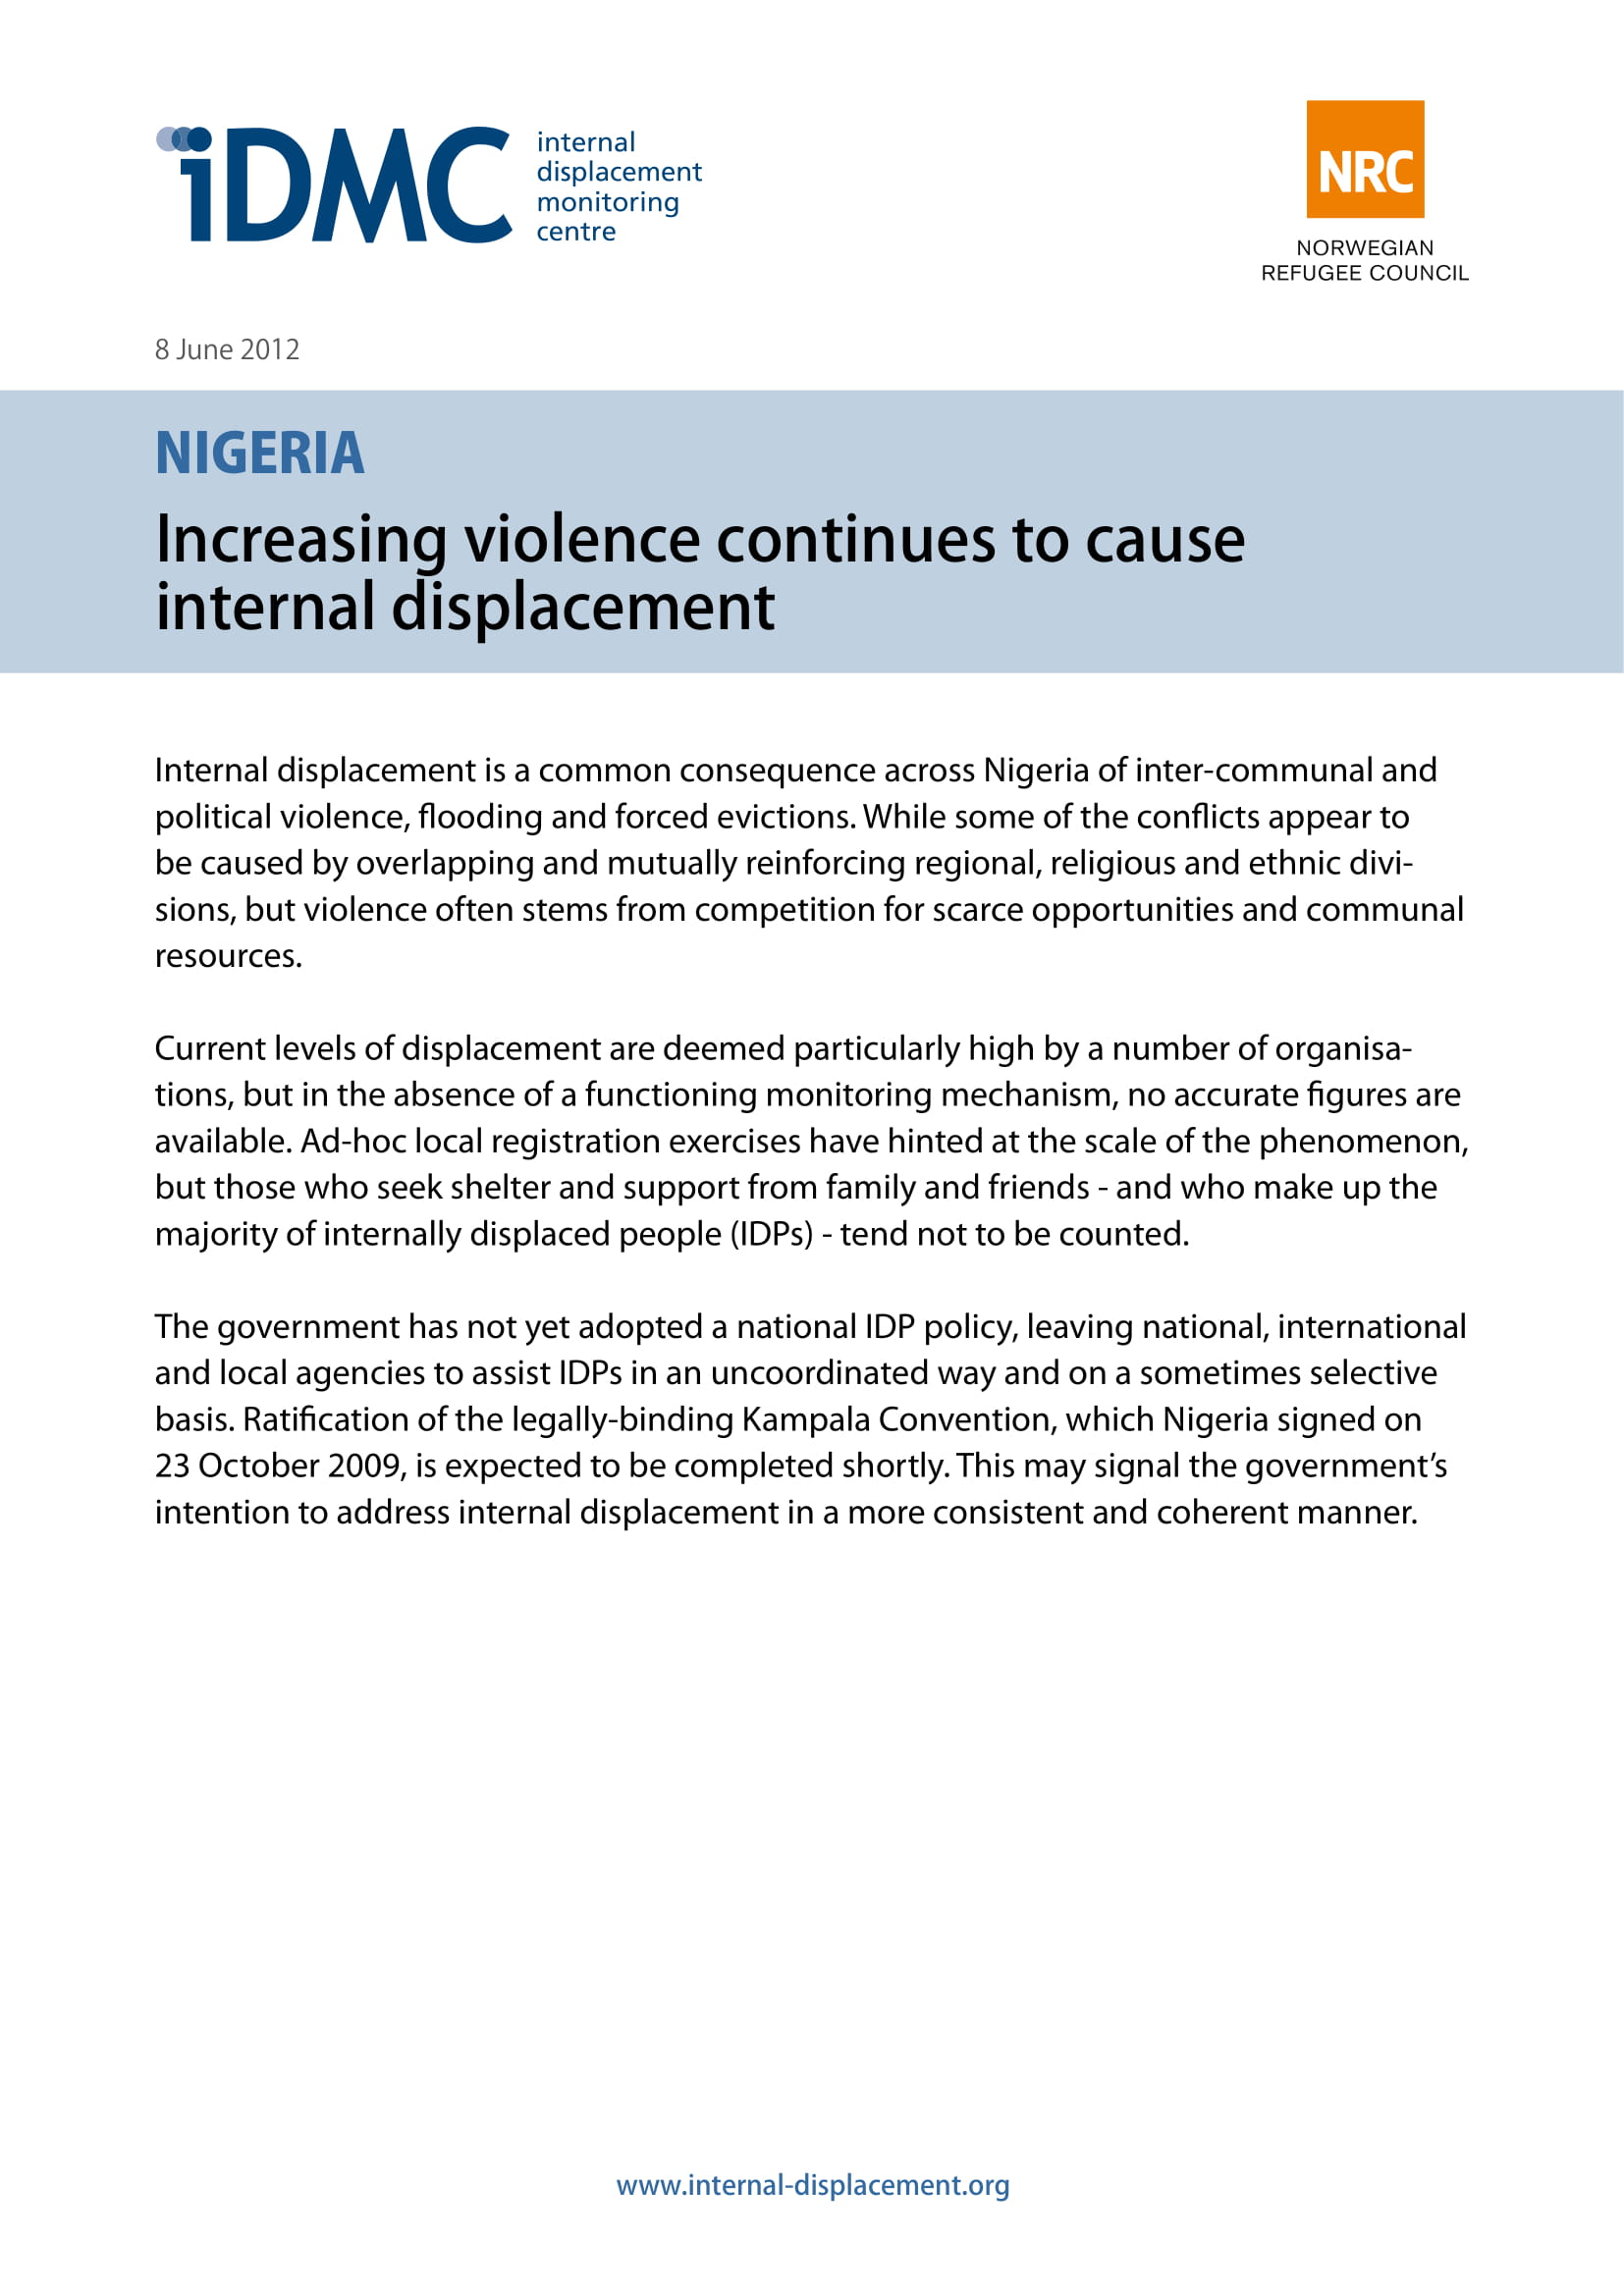 Nigeria: Increasing violence continues to cause internal displacement